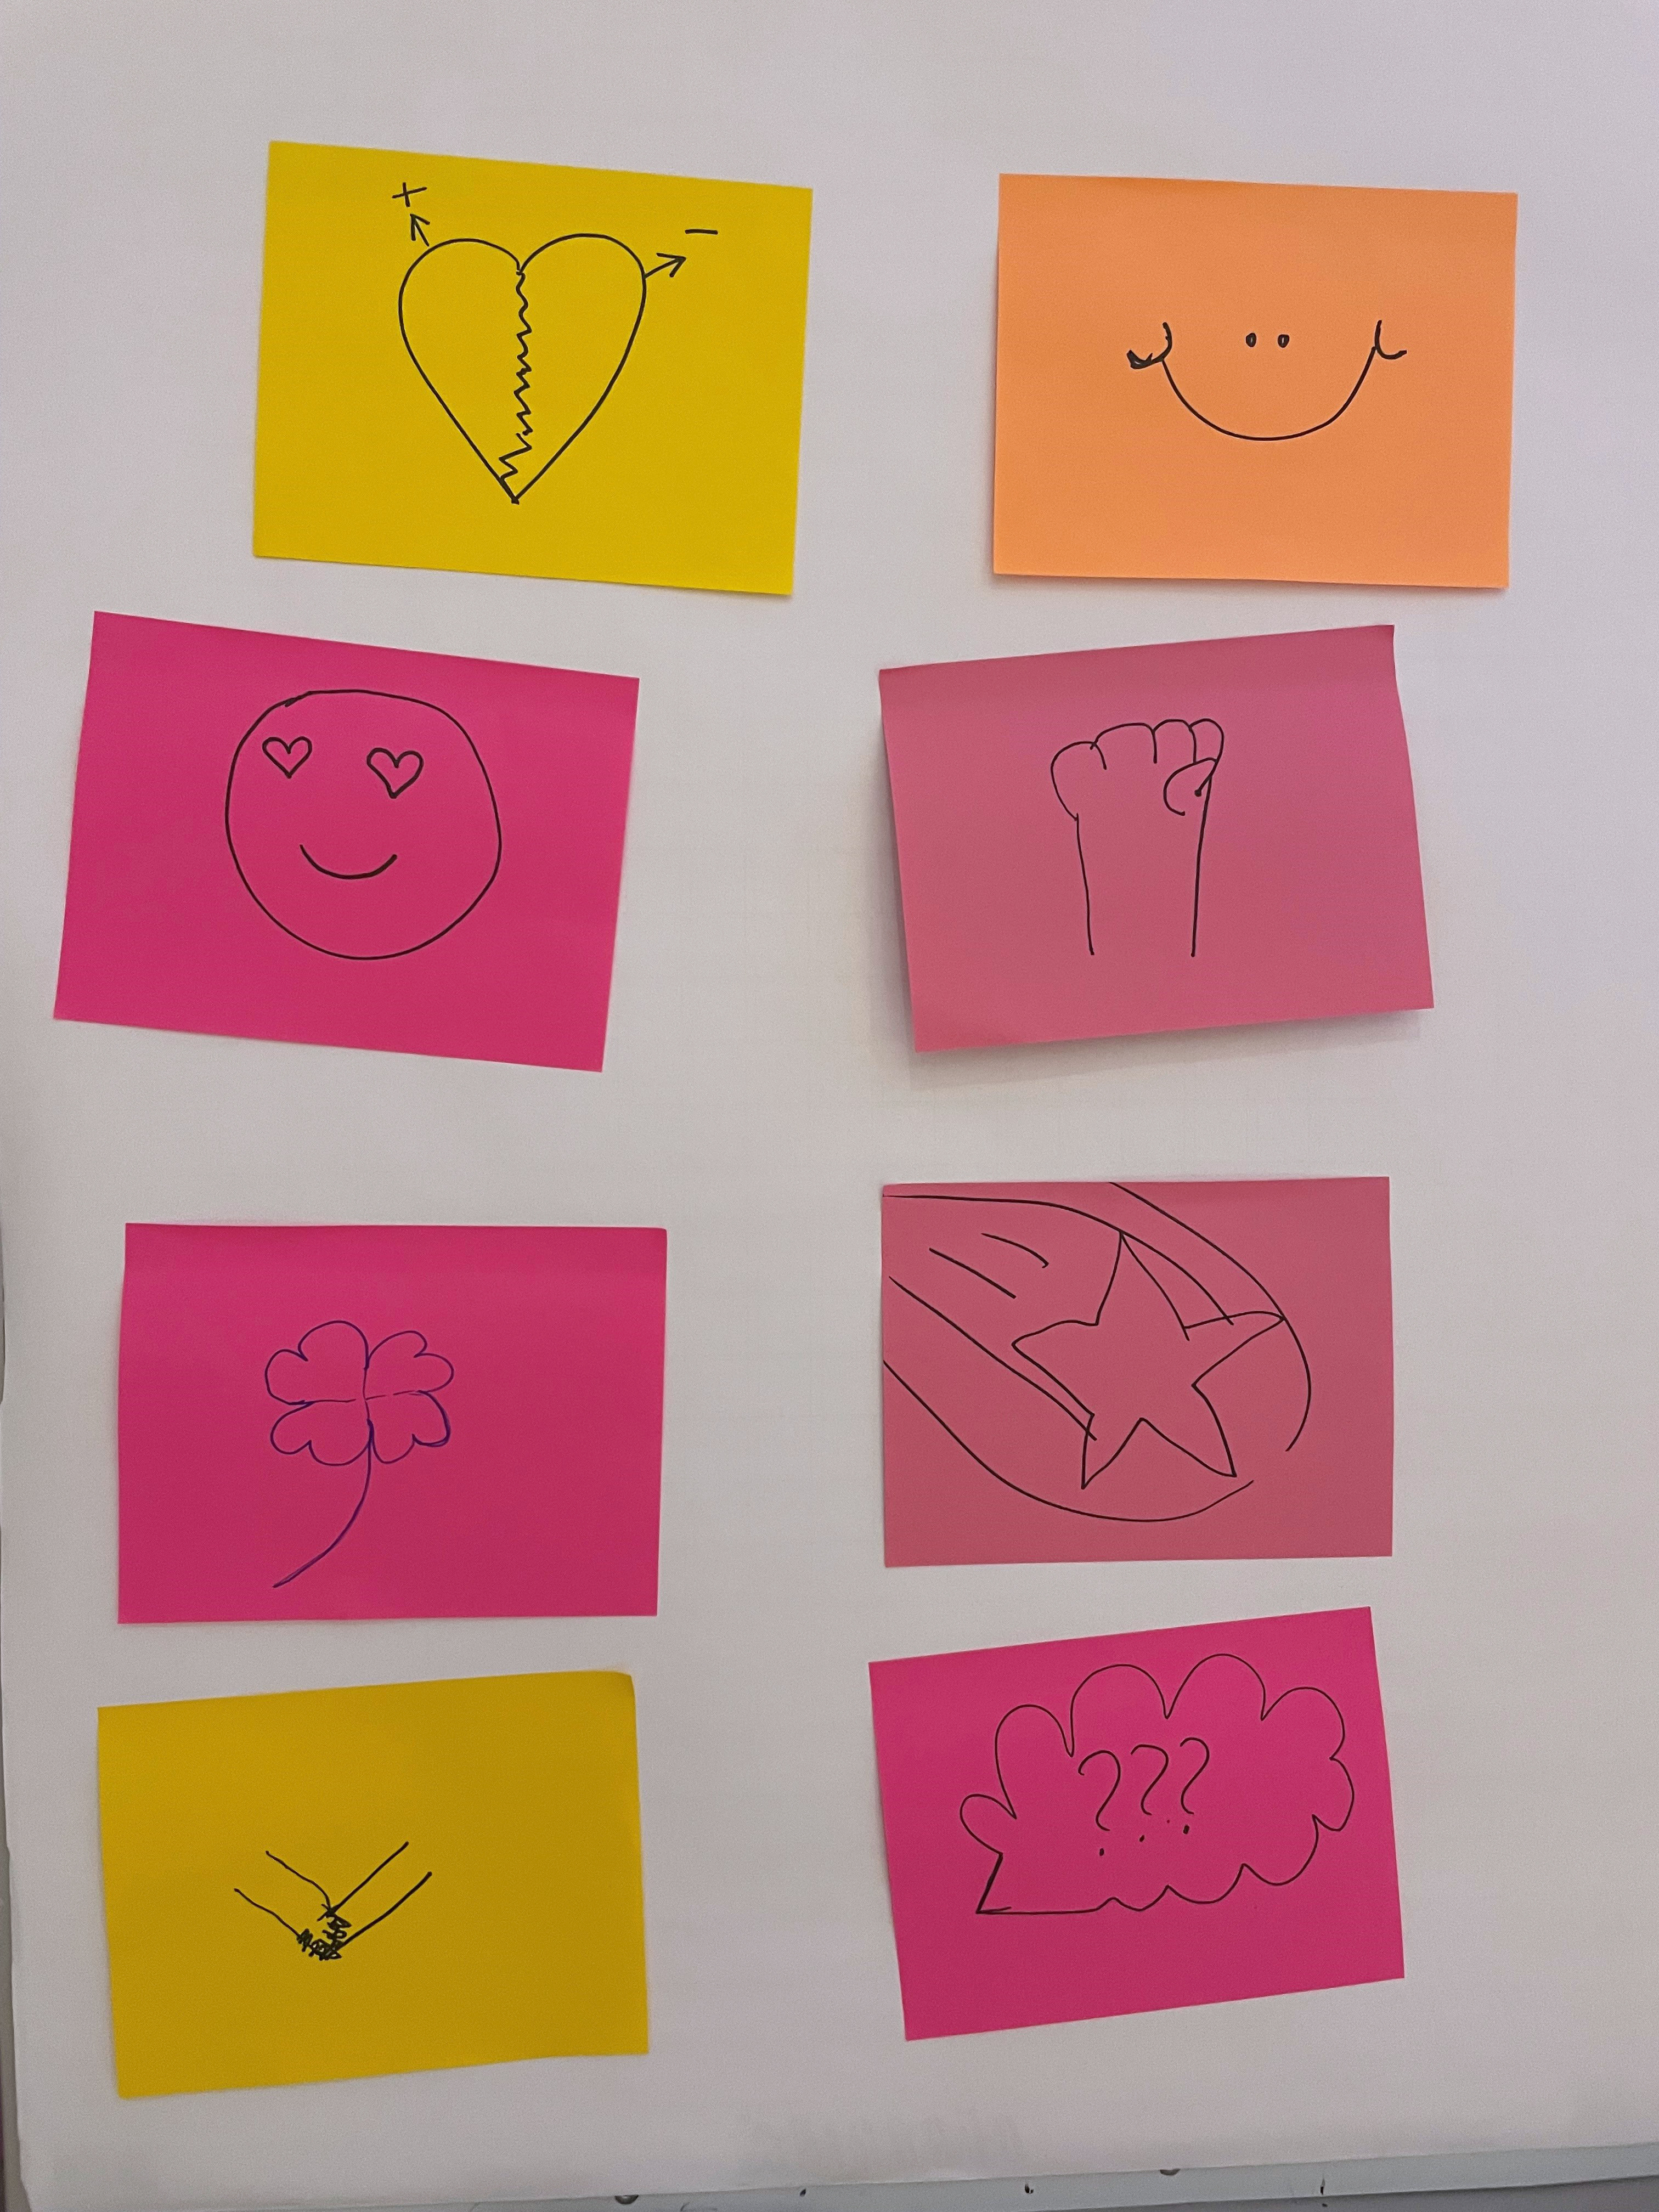 Which values are particularly important to me personally? - The participants drew them as symbols/pictograms in a "values gallery".